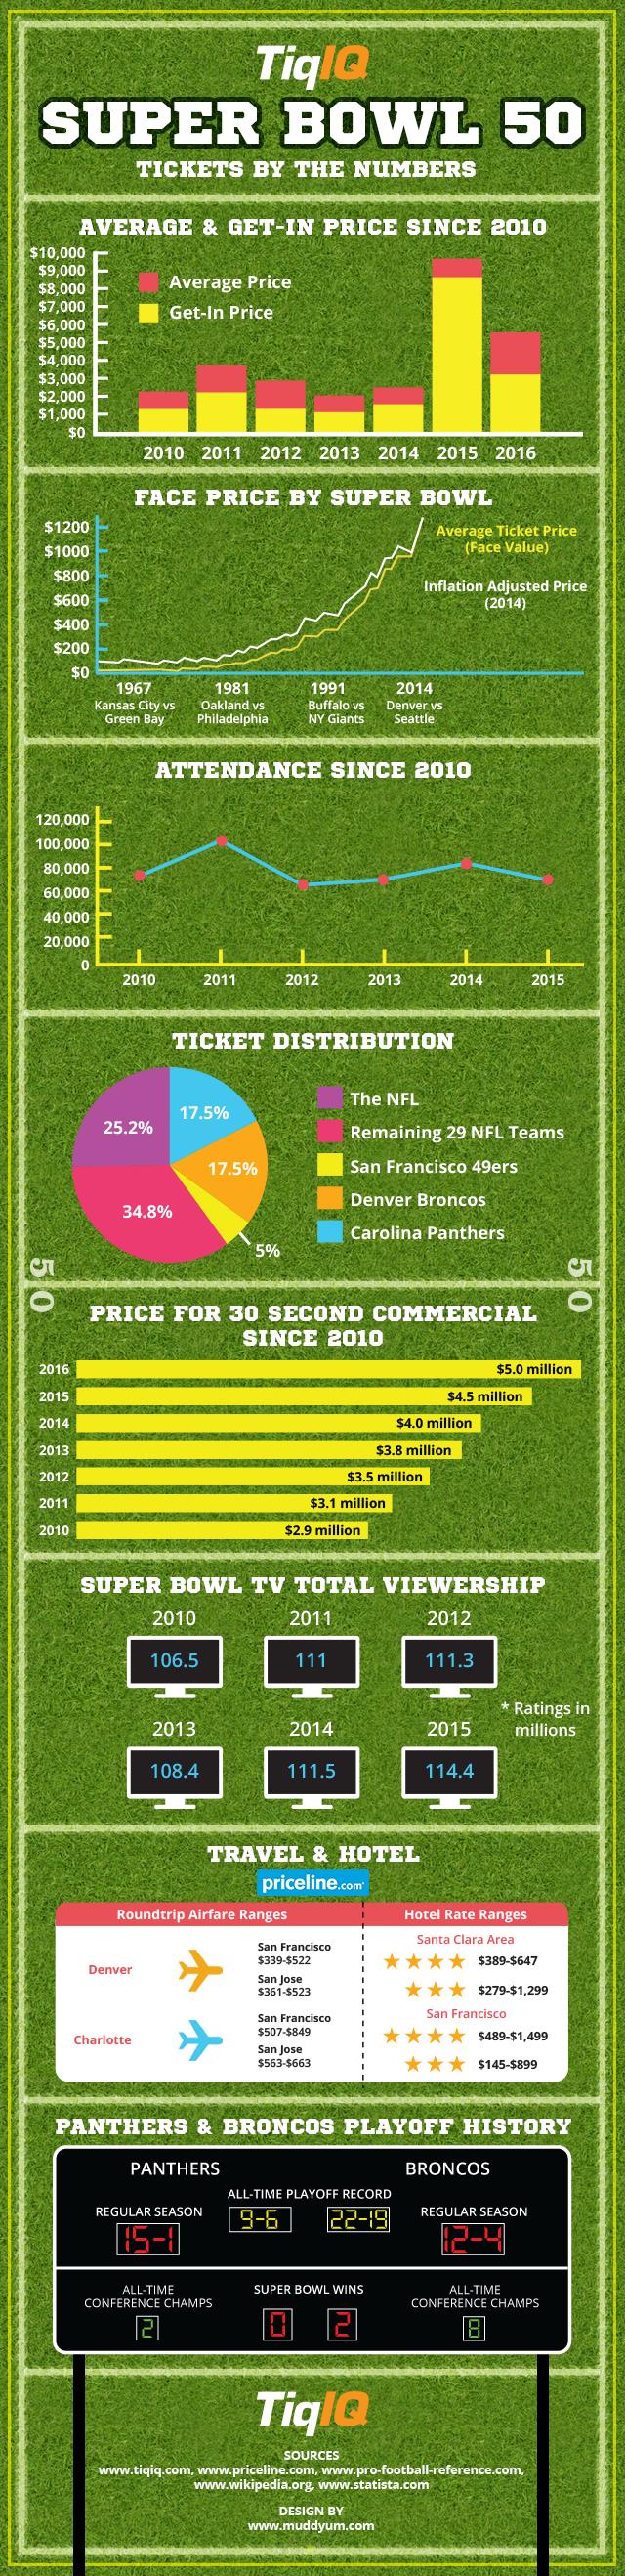 Super Bowl Infographic (Ticket Prices, TV Ratings, Commercials, Hotels, etc) - Imgur